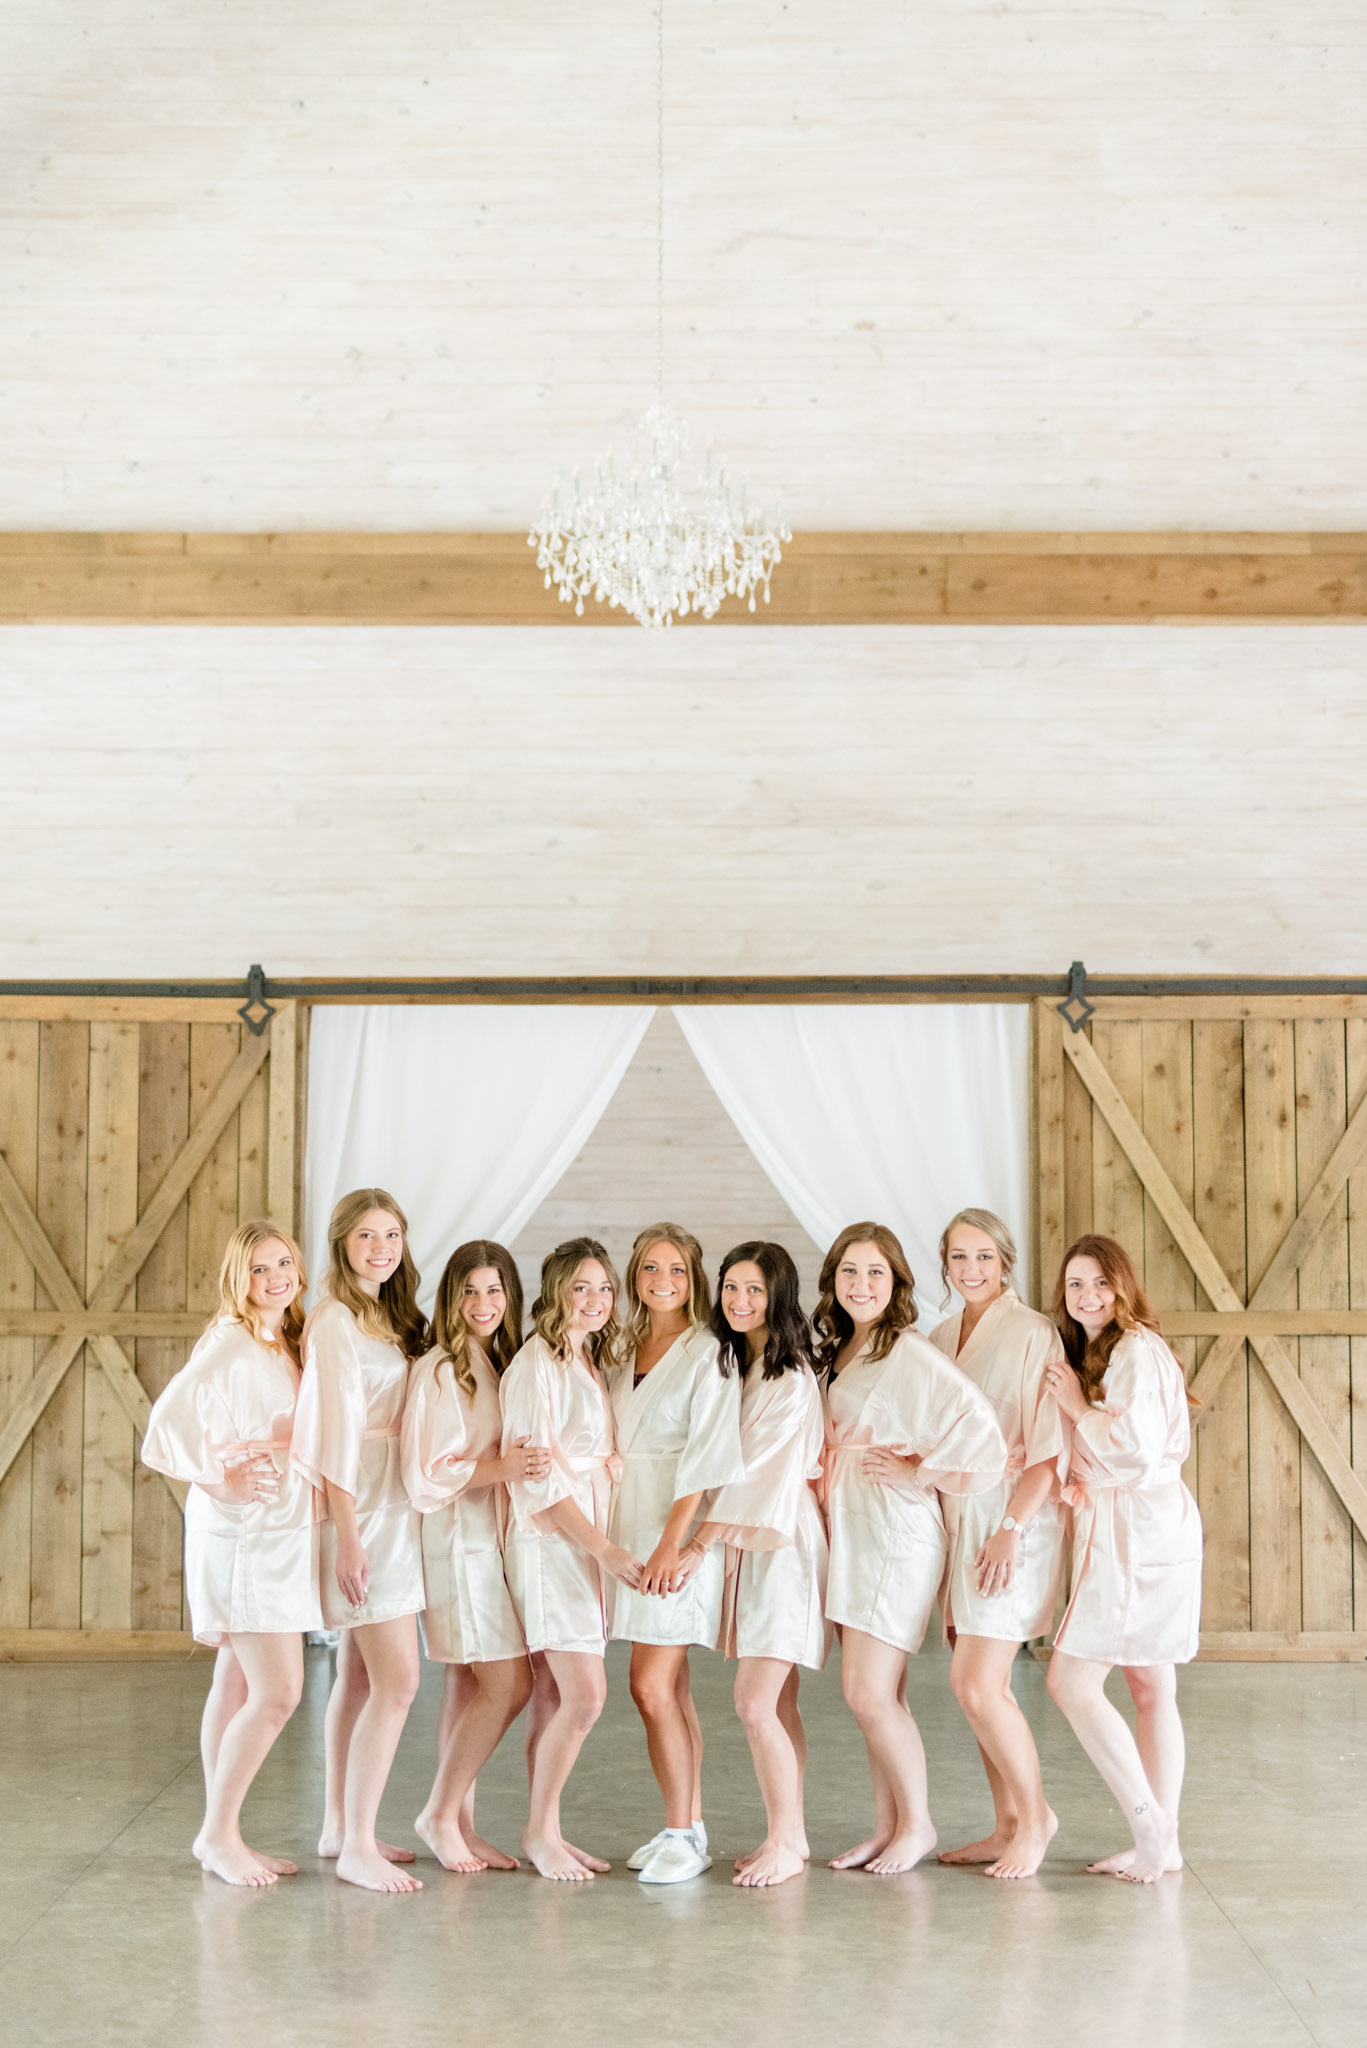 Bridal party poses in cute robes.